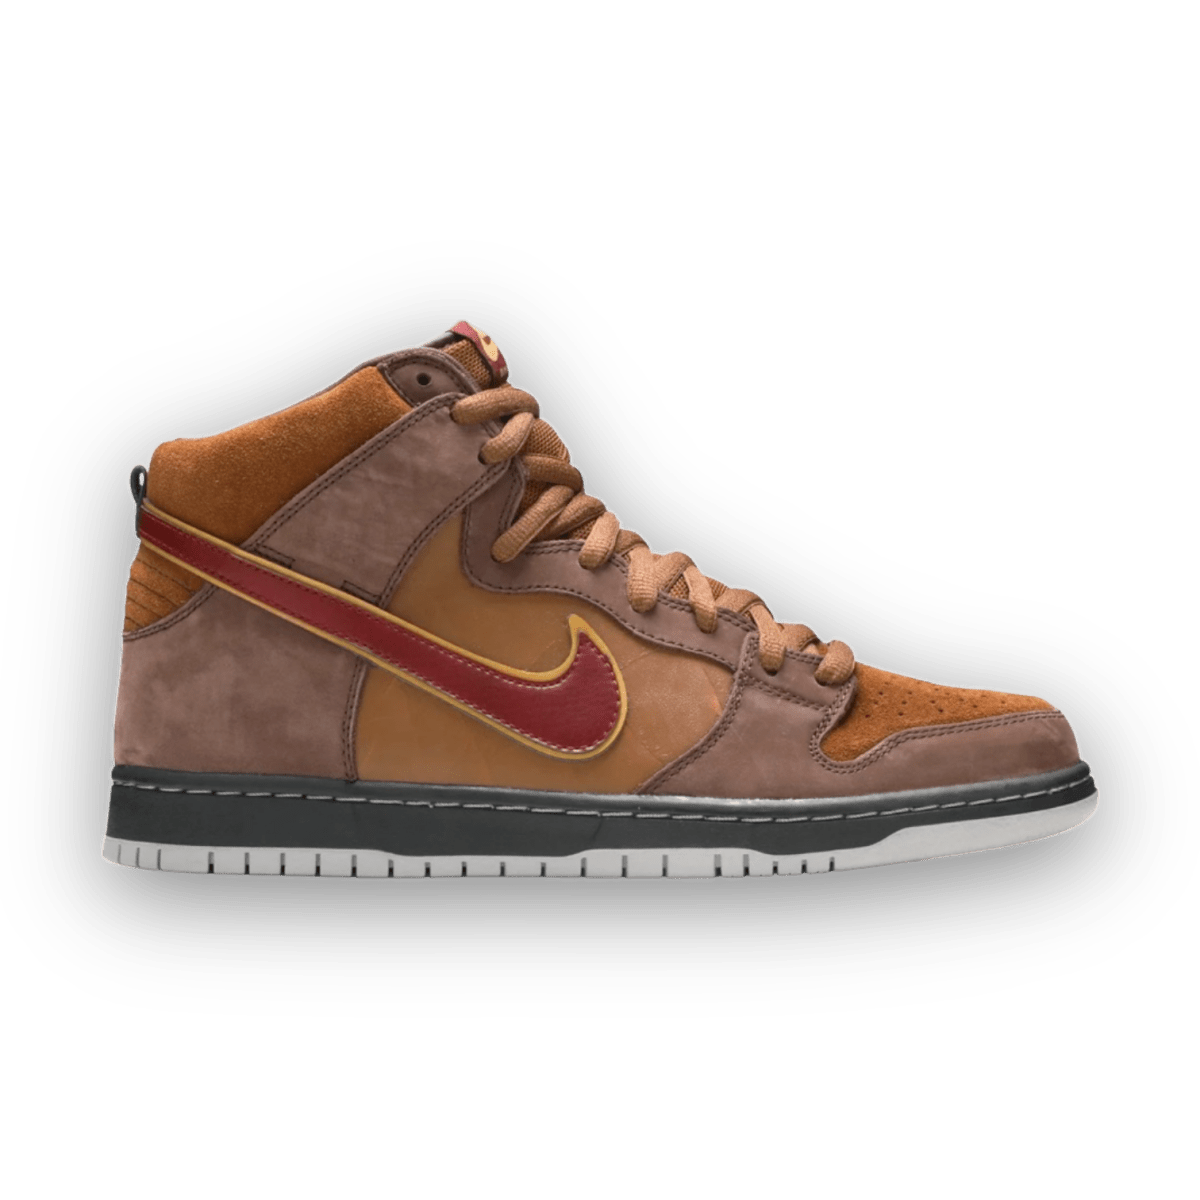 Dunk High Premium SB 'Cigar City' Gently Enjoyed (Used) Men 9 - No Box - High Sneaker - Jawns on Fire Sneakers & Streetwear